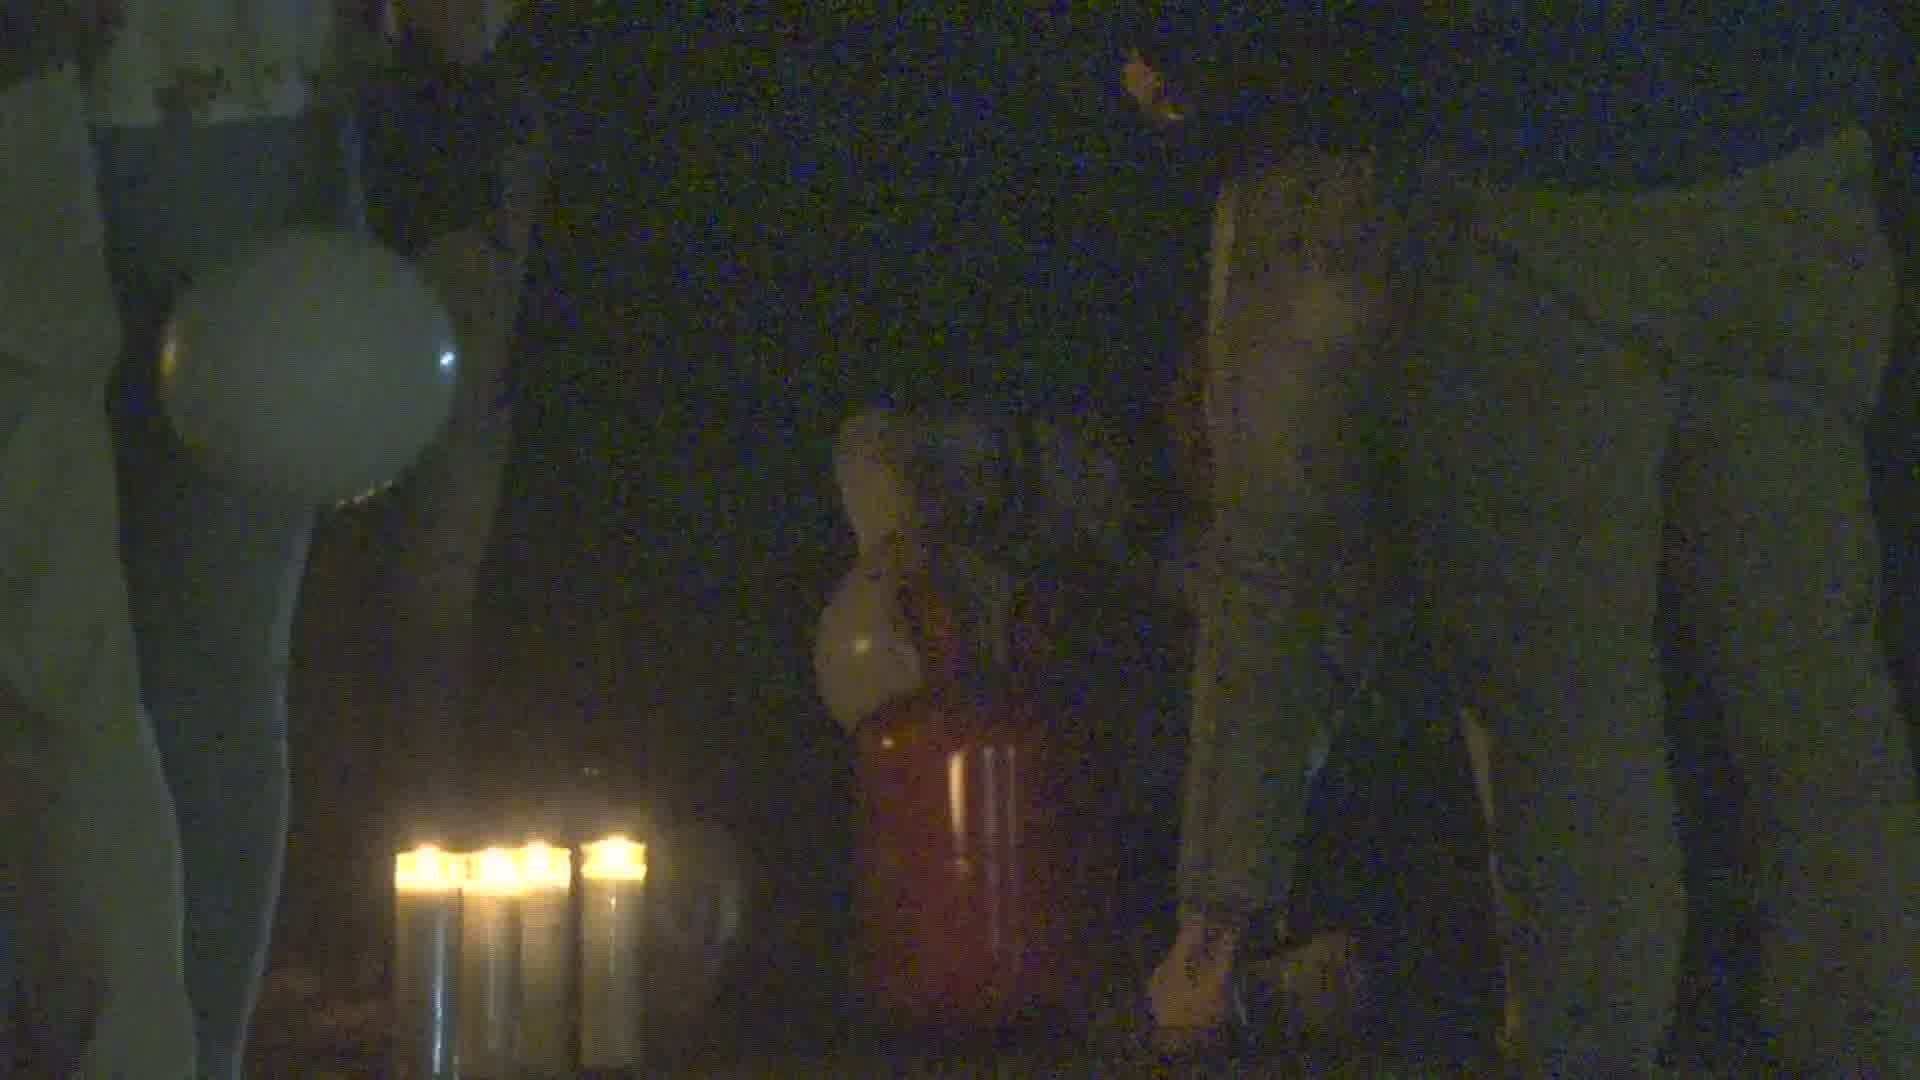 At the vigil, the community lit candles and released white balloons in honor of Colton.